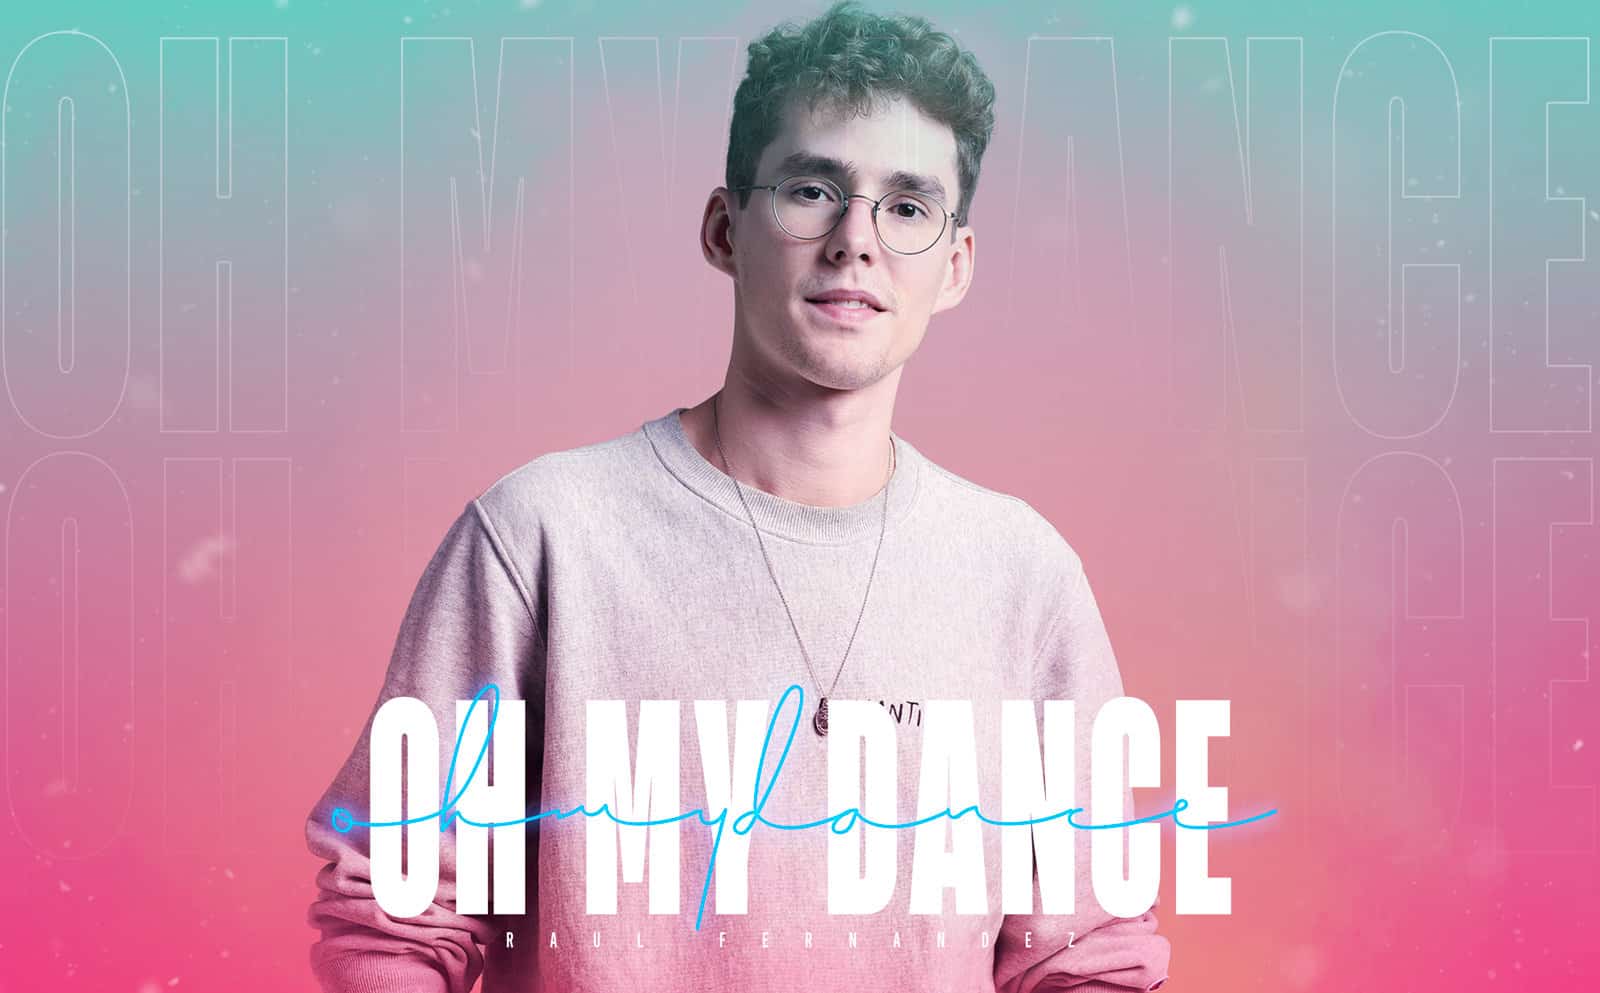 OHMYDANCE Ep.44 con Lost Frequencies